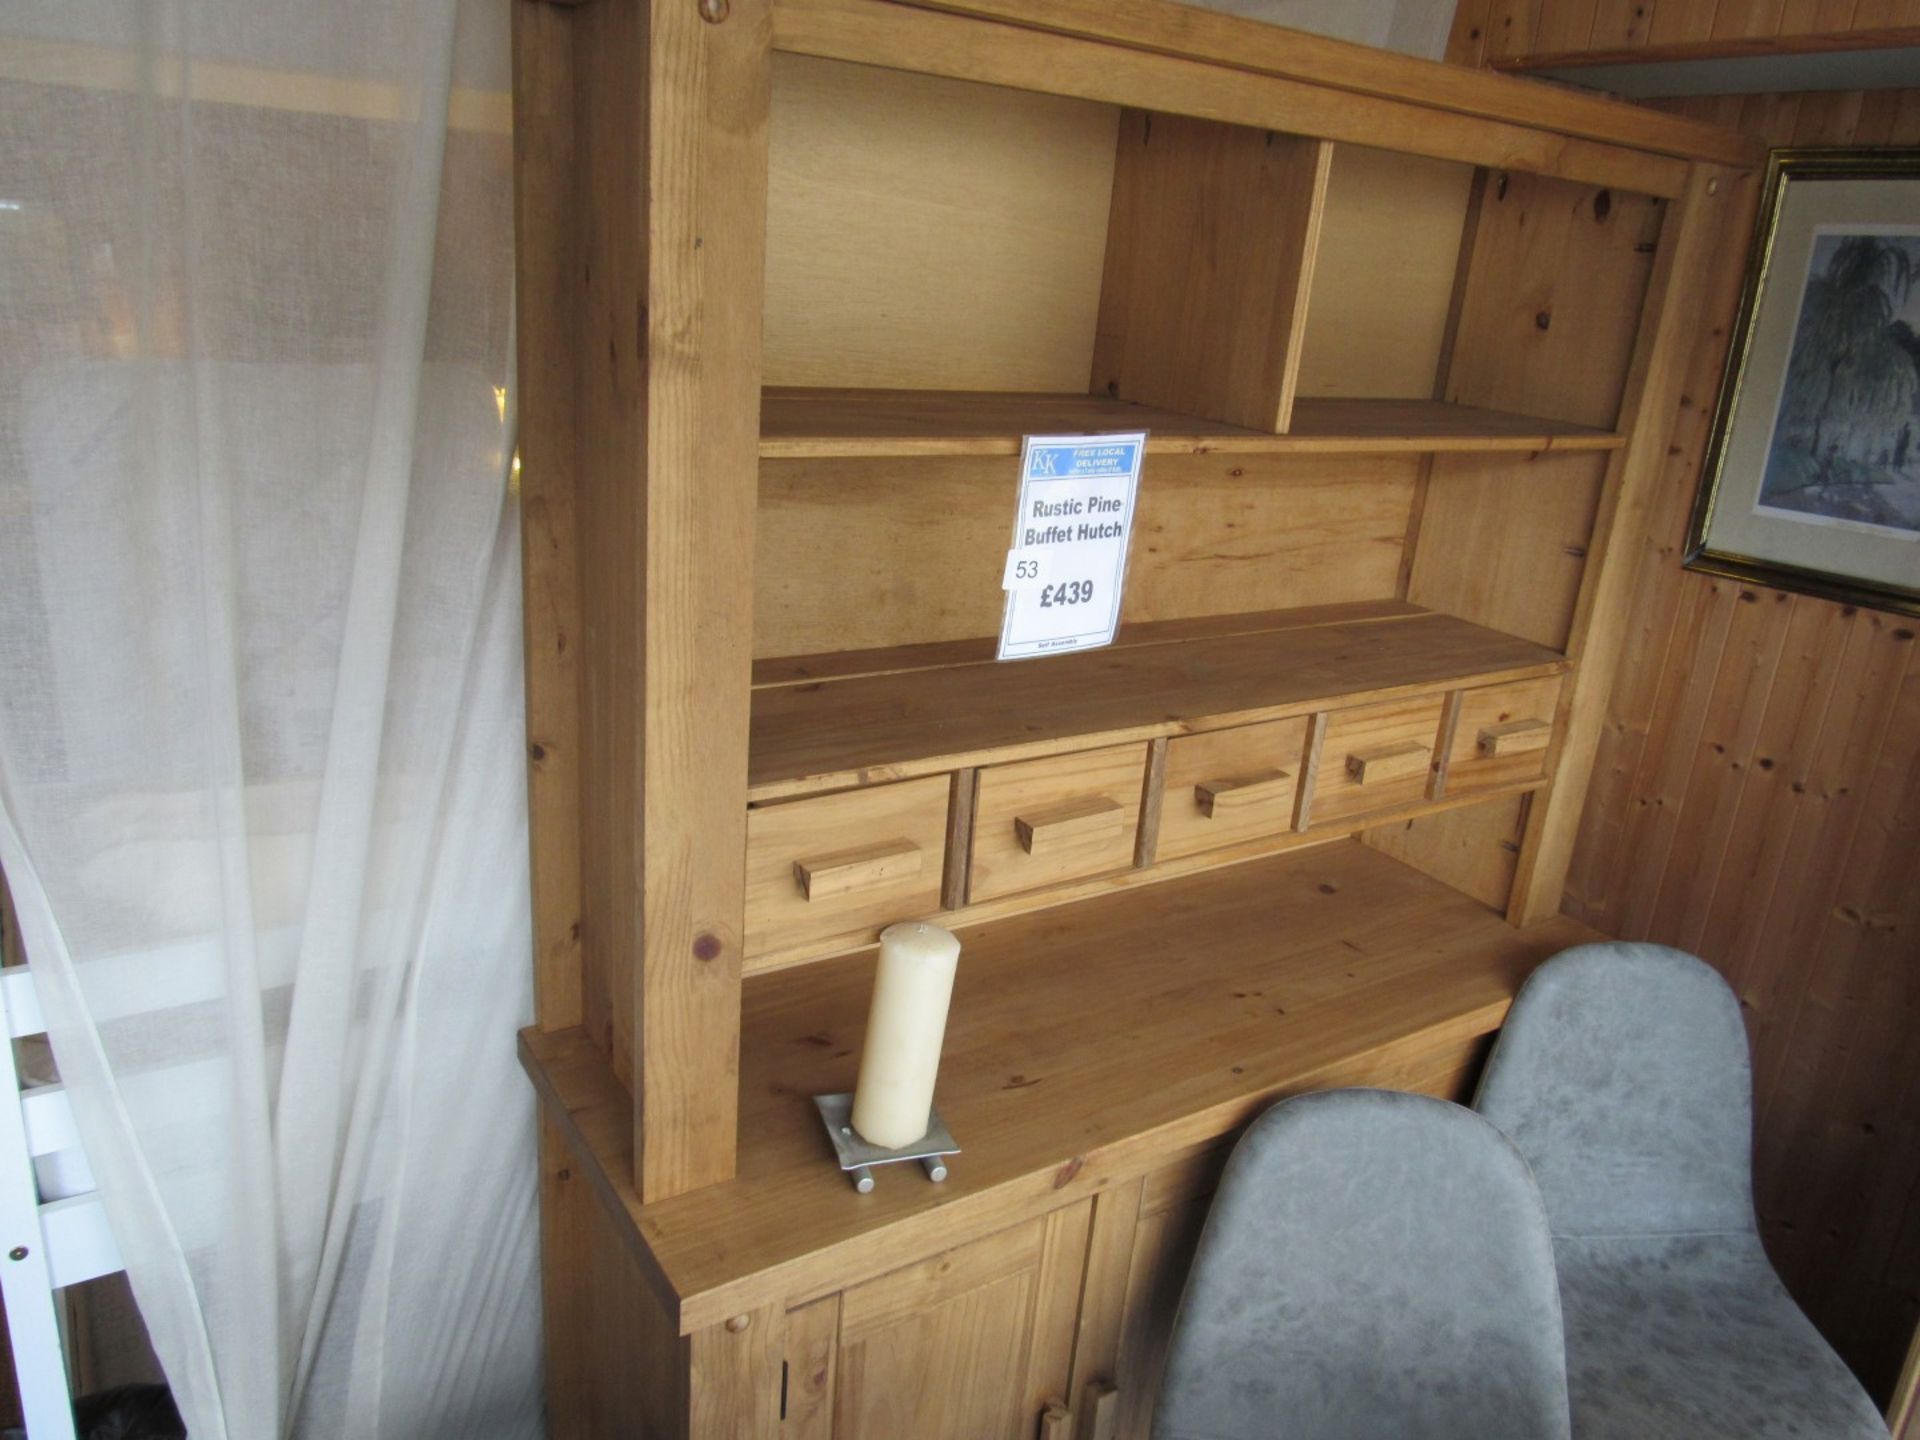 Rustic Pine Buffet Hatch rrp. £439 - Image 2 of 2